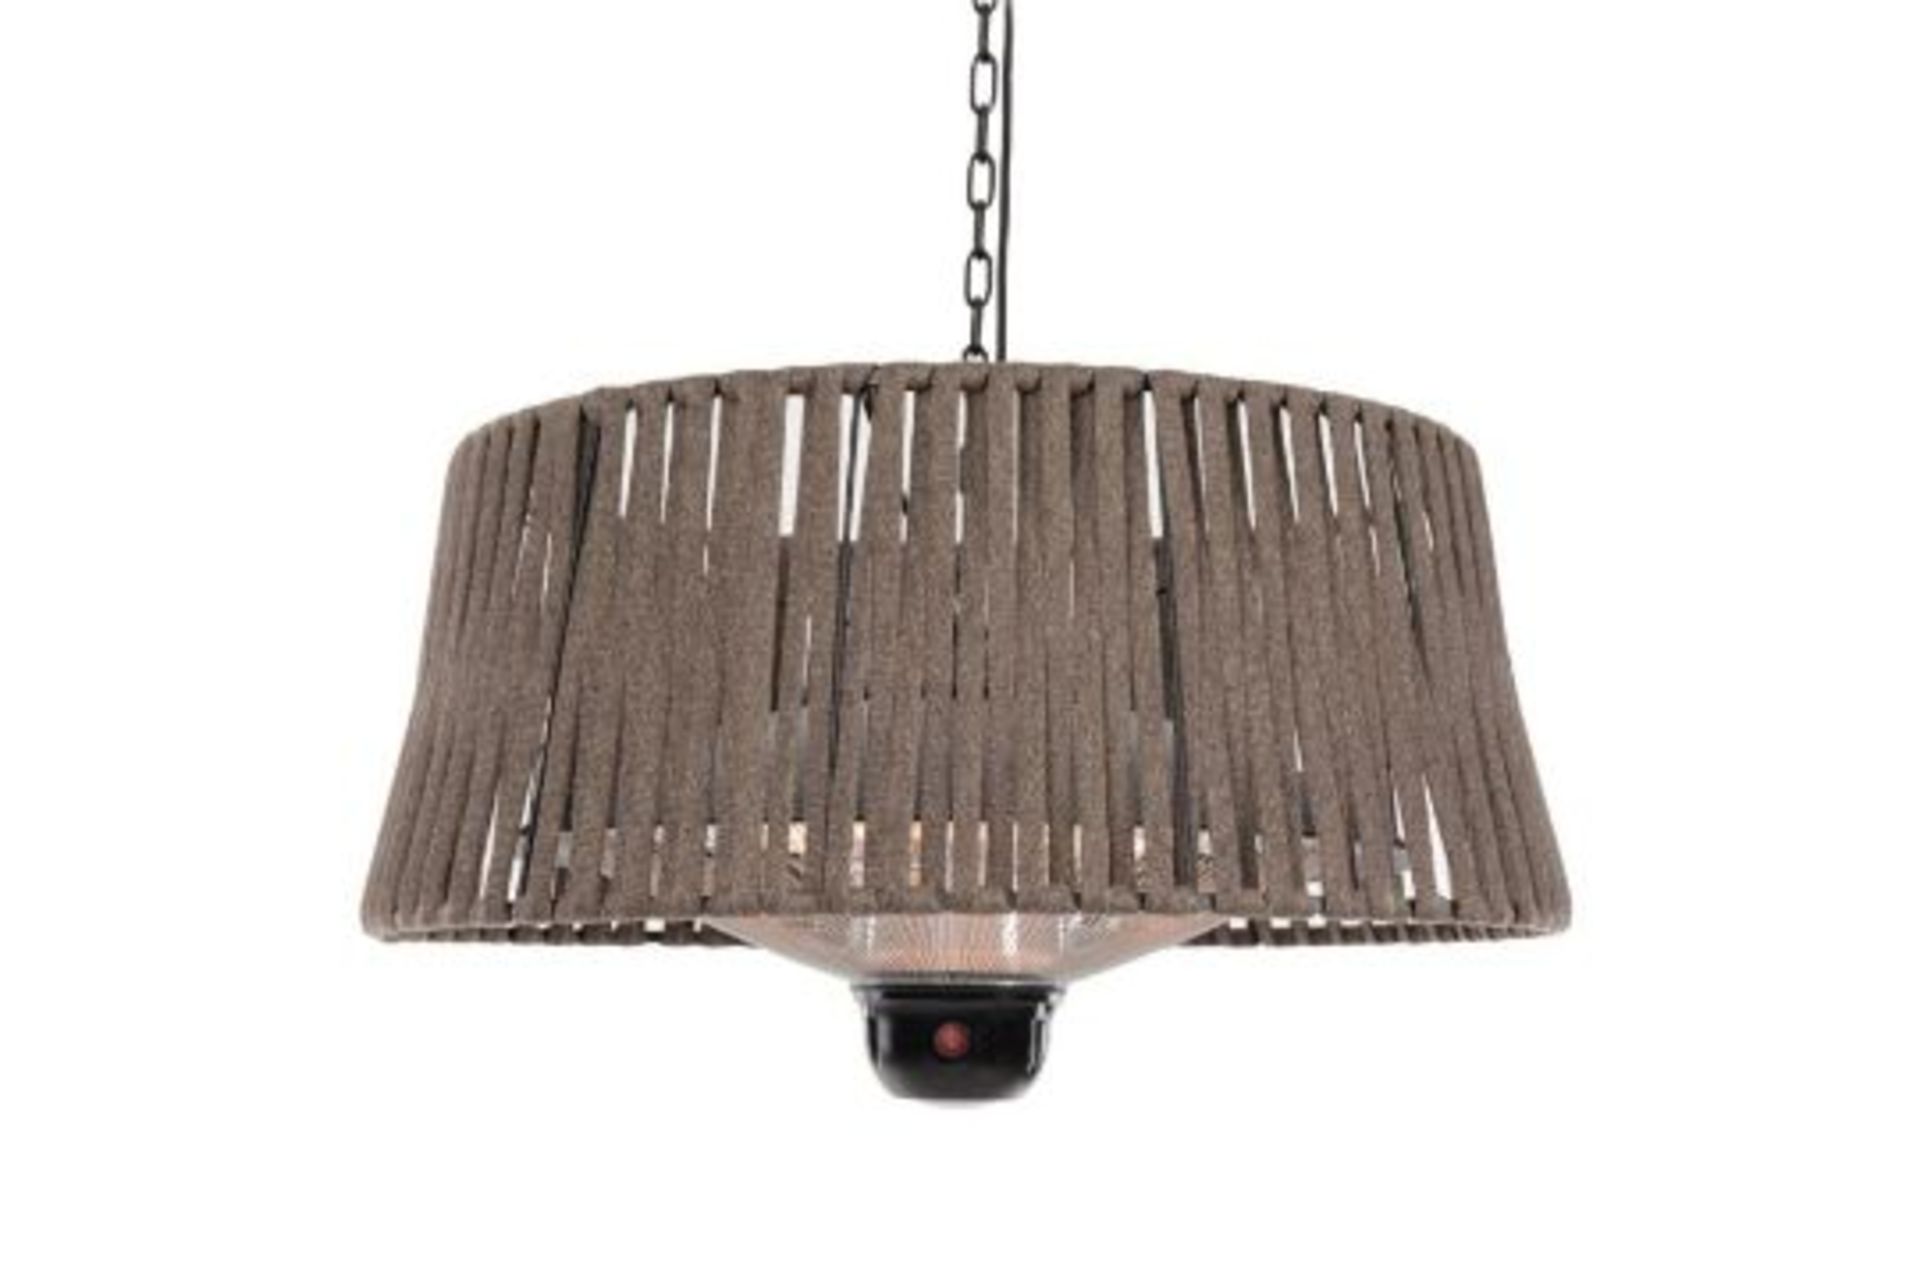 Pallet to include 12 x Sunred Brown Heater Artix Corda Hanging 1800W is a high quality and efficient